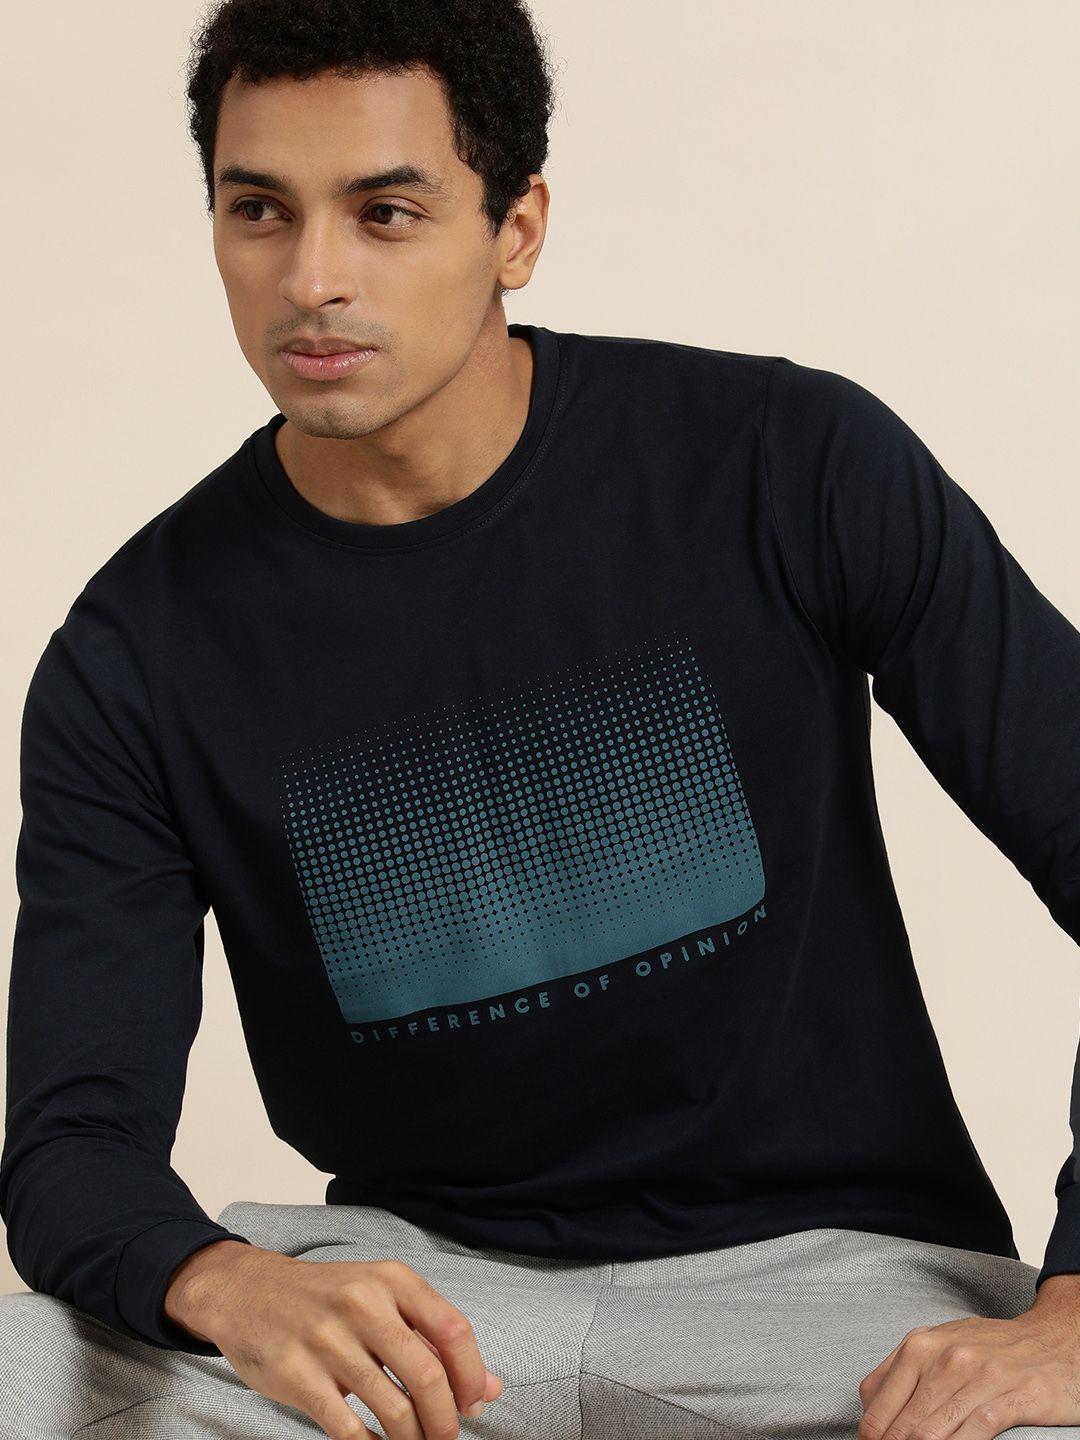 difference-of-opinion-men-navy-blue-printed-round-neck-t-shirt